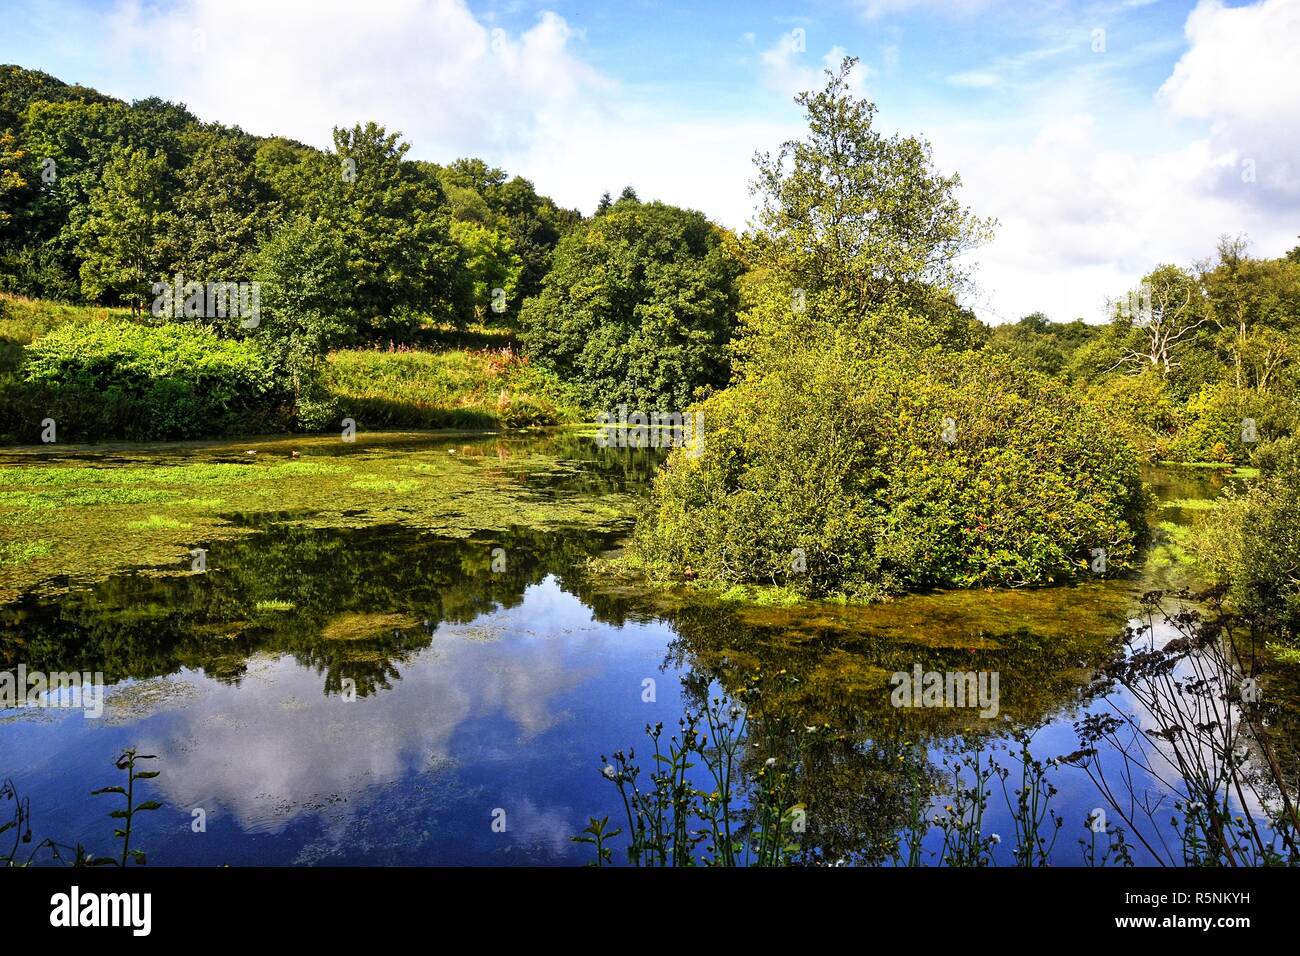 Otterhead Lakes, Blackdown Hills, Otterford, Somerset, England. Area of Outstanding Natural Beauty. UK Stock Photo